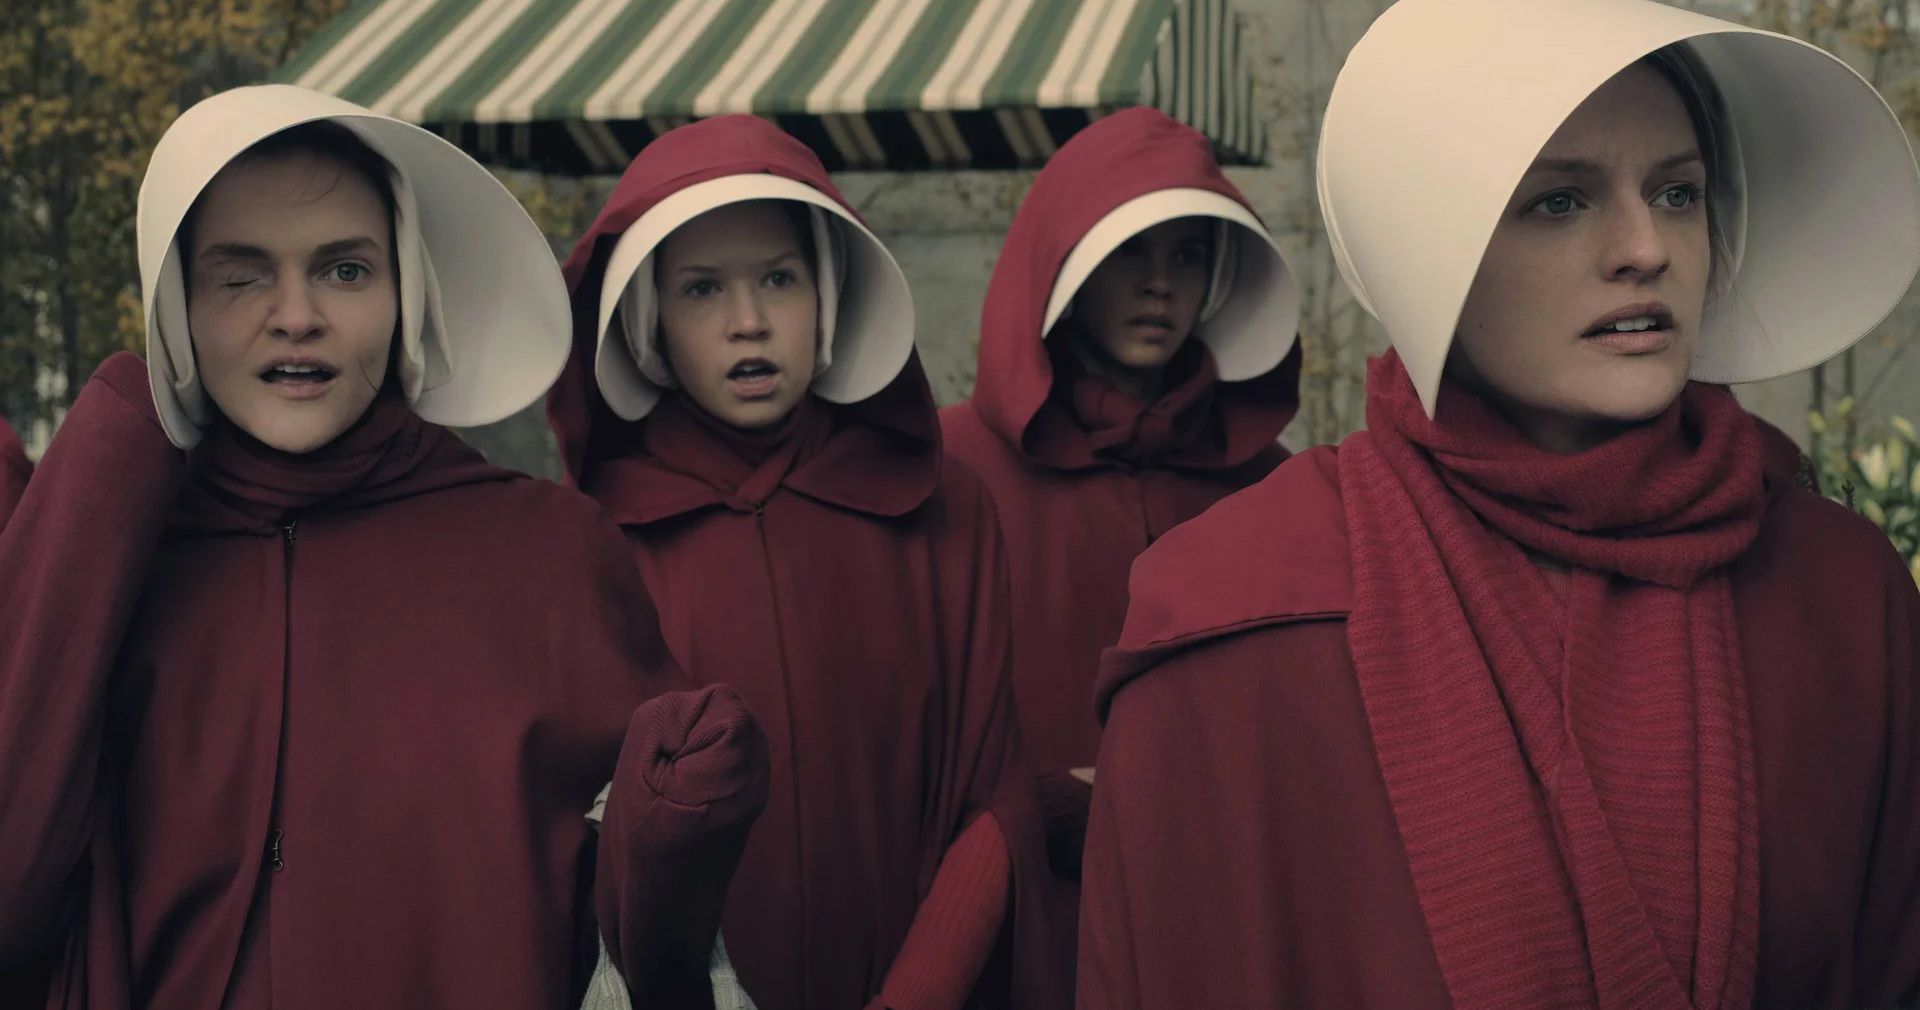 Role of Offreds Room in a Handmaids